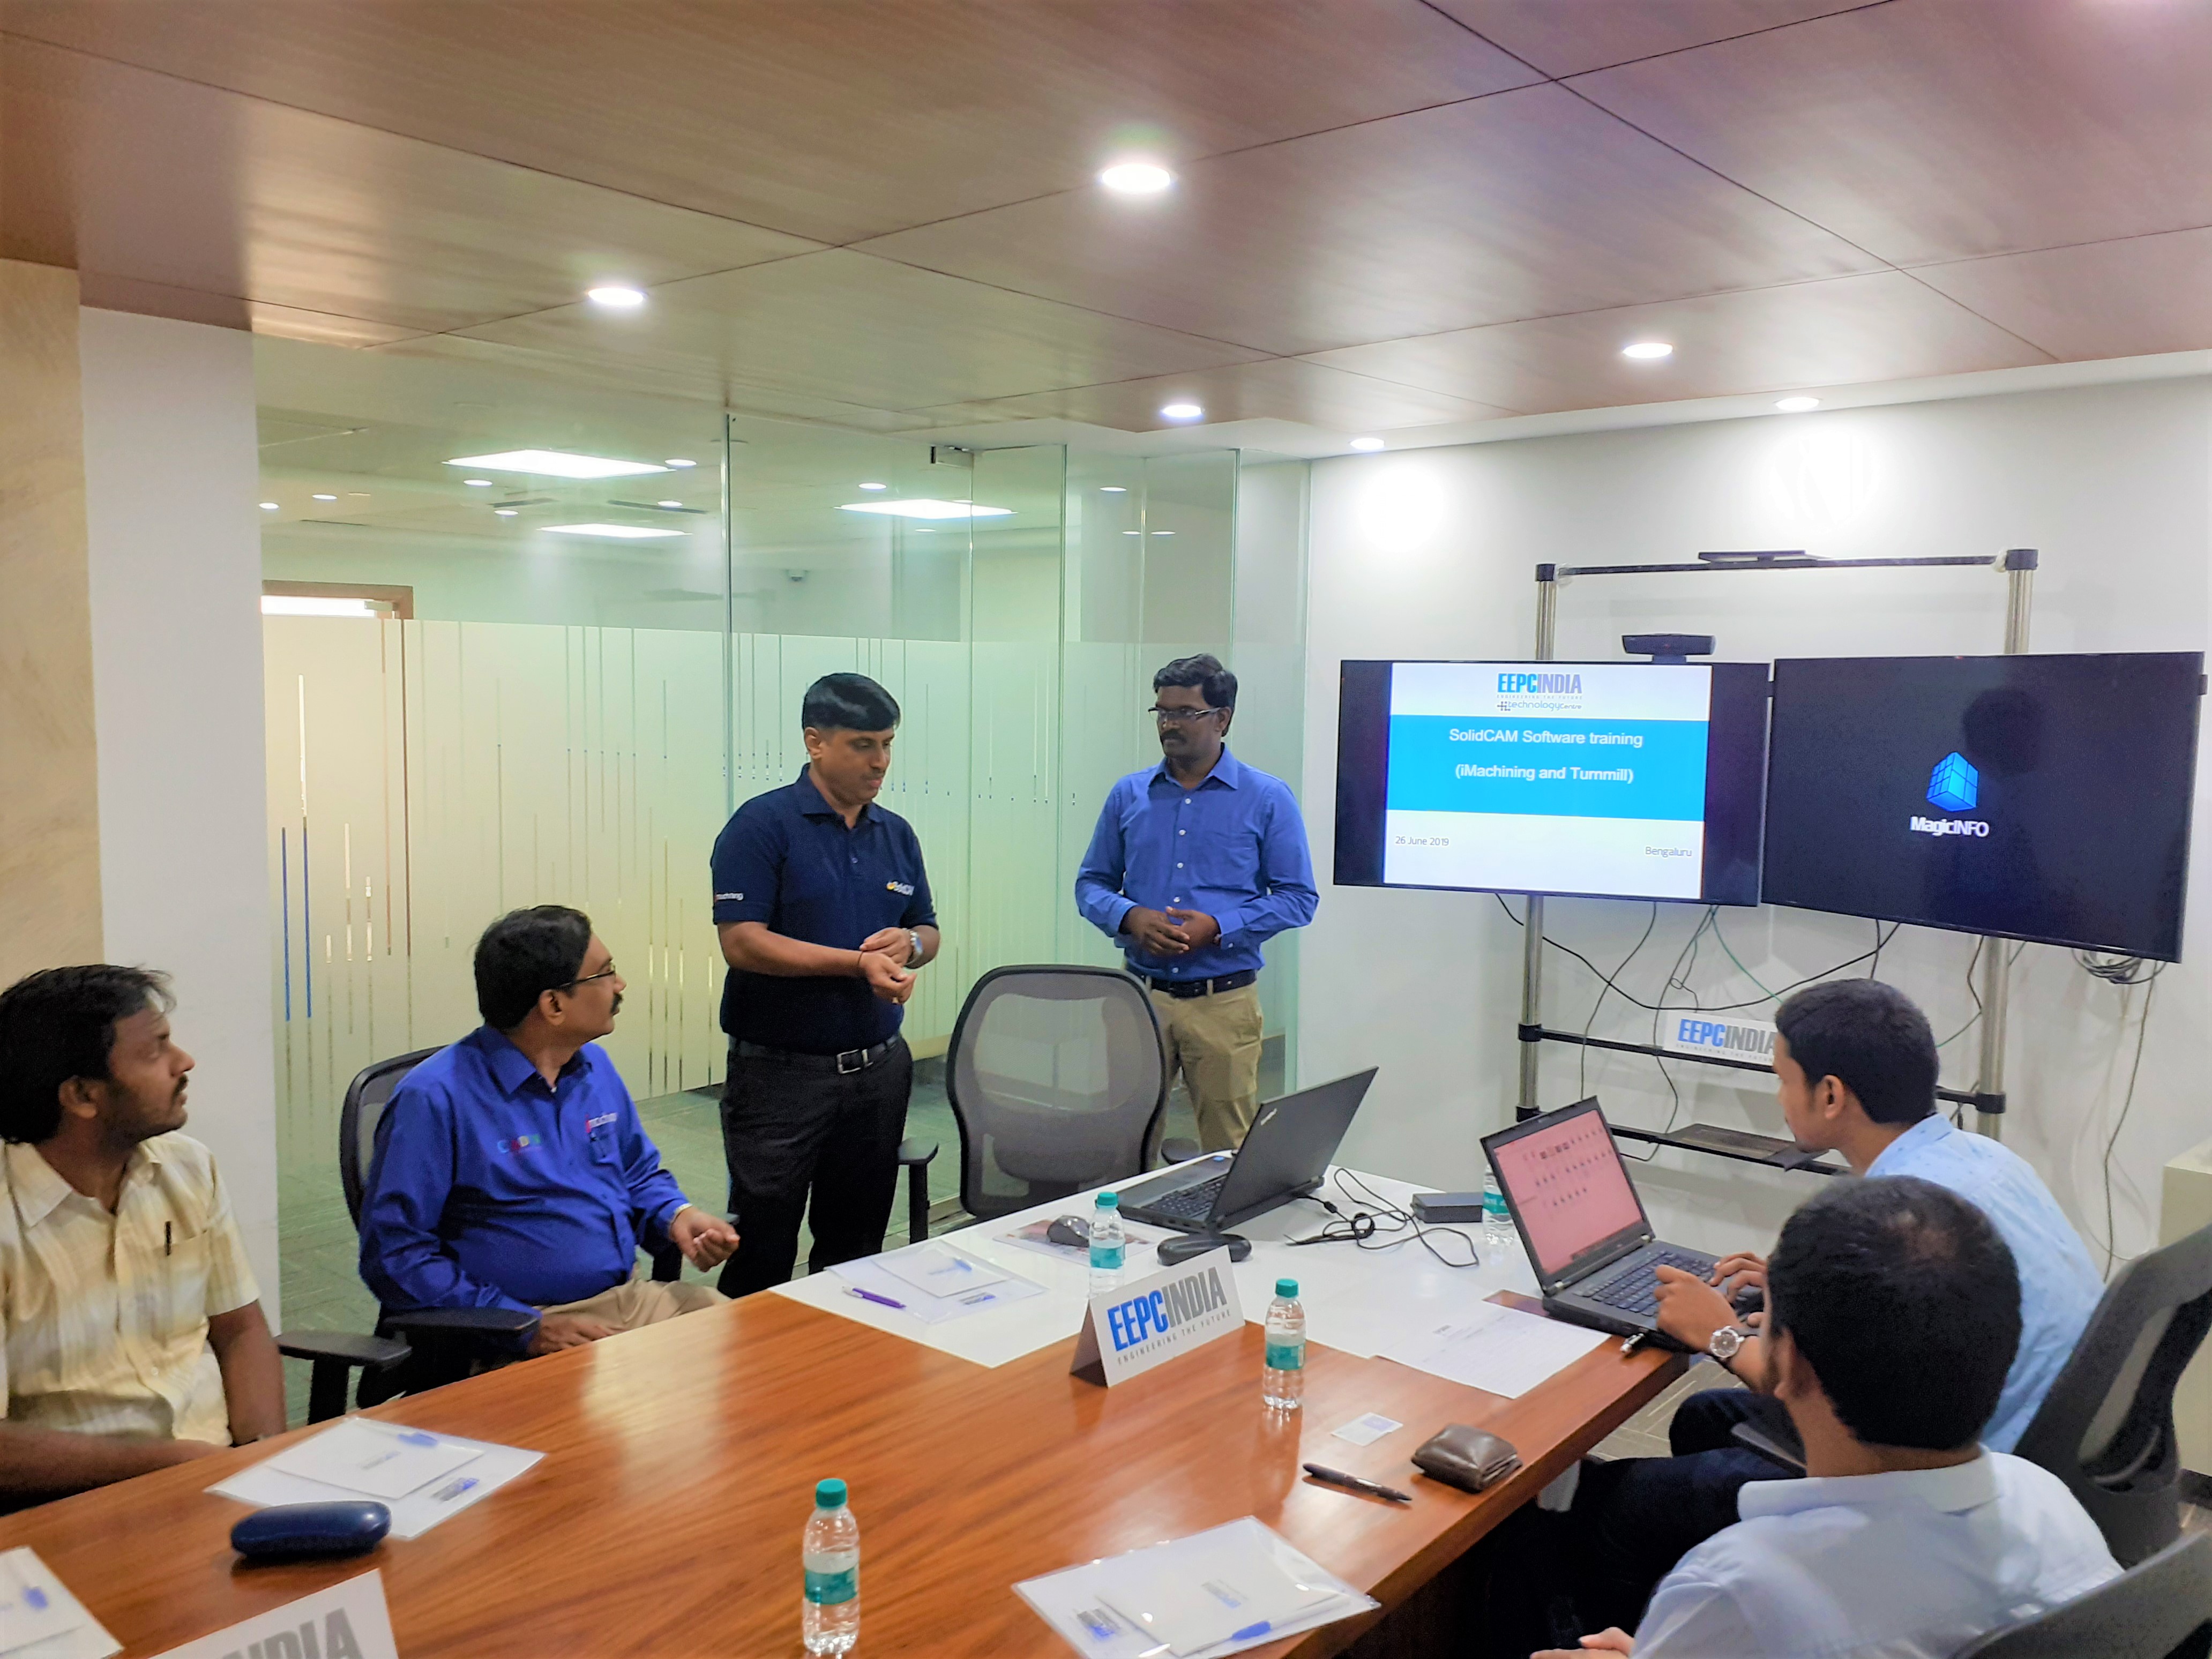 Mr. D. Karthikeyan, Assistant Head, EEPC India Technology Centre, Bengaluru welcoming the participants at the training session